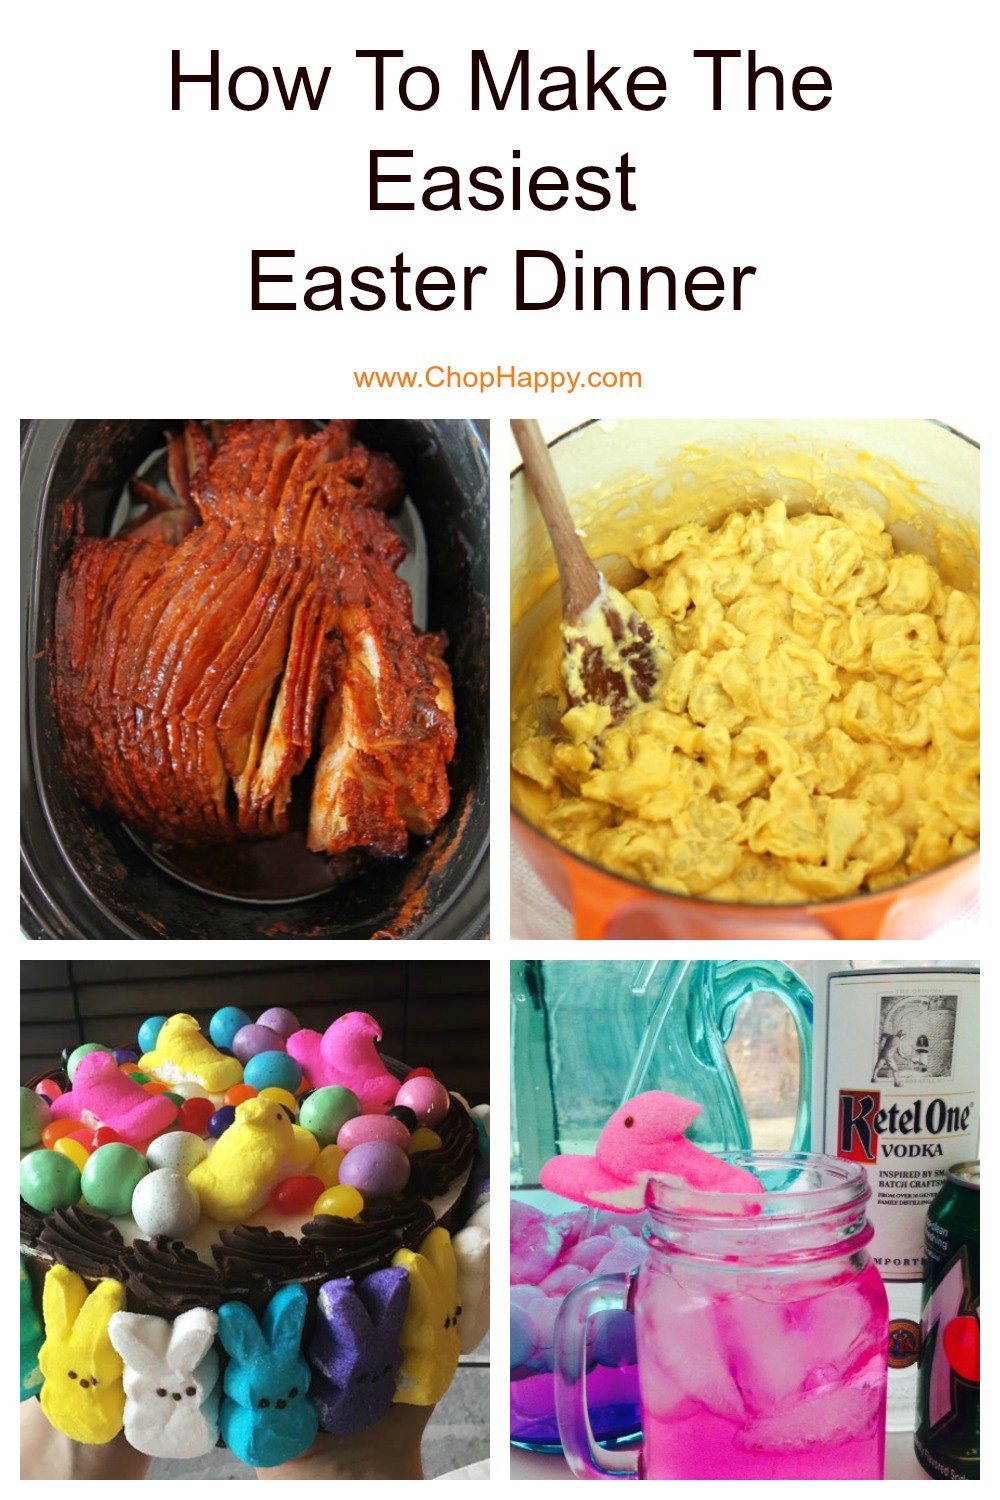 How To Make The Easiest Easter Dinner. Grab a ham, slow cooker, mac and cheese, and PEEPS candy. This is make ahead and fast recipes. Happy Easter and Happy Cooking! www.ChopHappy.com #Easter #HolidayDinner